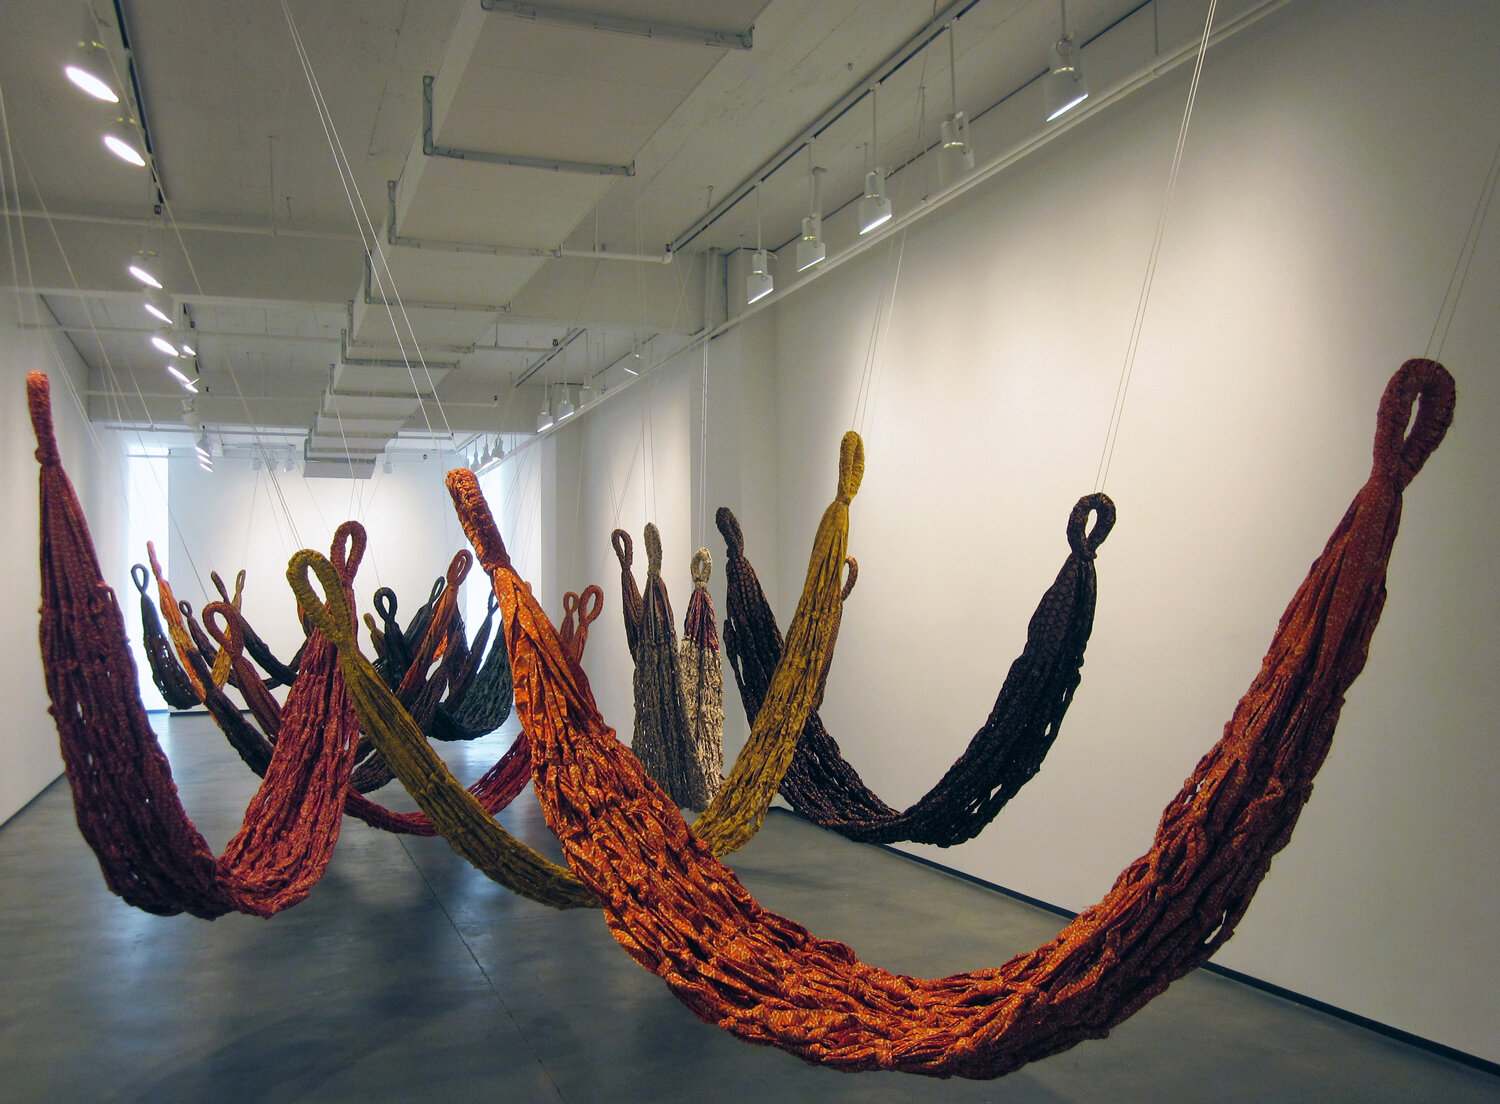 Hanging-by-a-Thread-installation-view-4.jpg